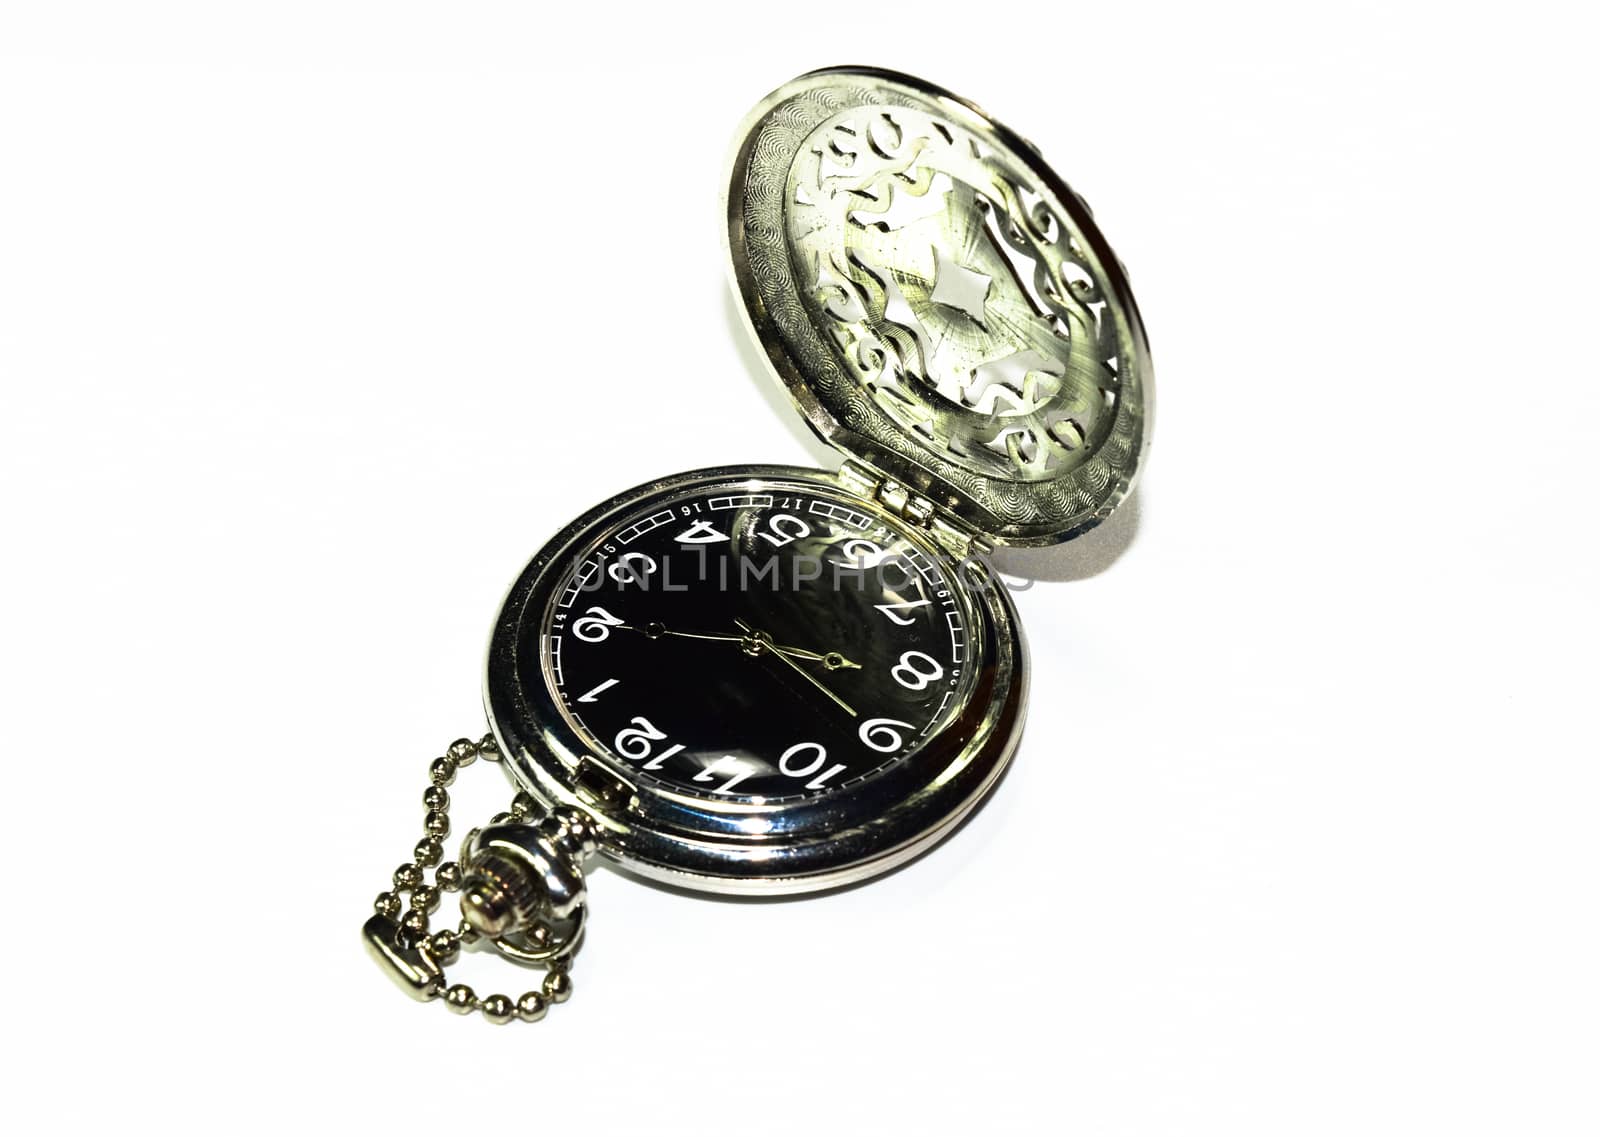 Steel pocket watch, shiny, stainless steel. by fedoseevaolga